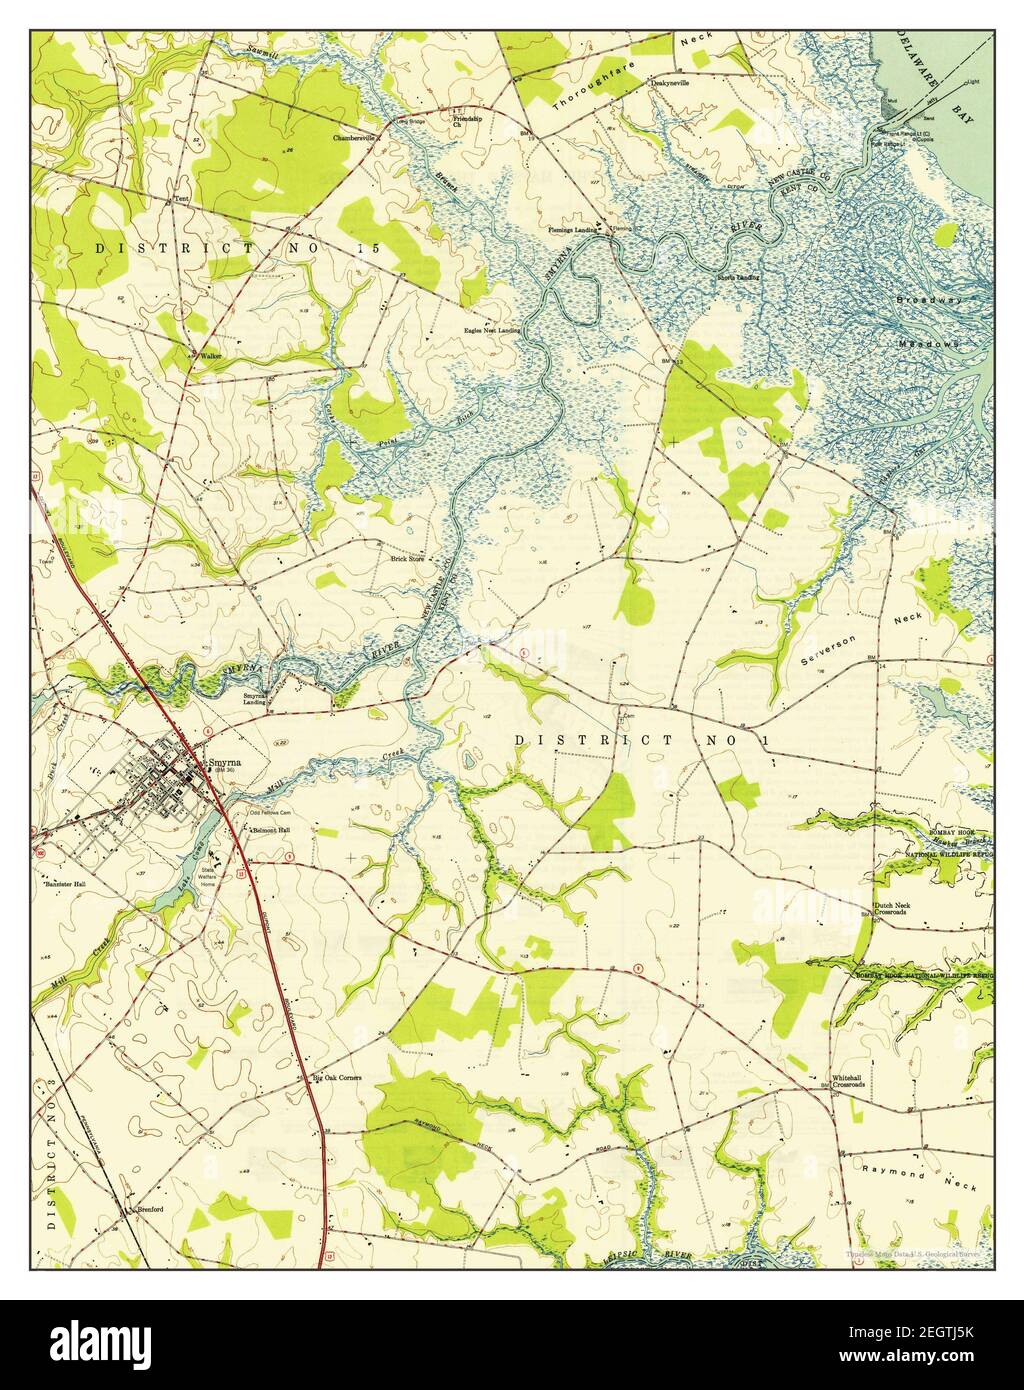 Smyrna, Delaware, map 1949, 1:24000, United States of America by Timeless Maps, data U.S. Geological Survey Foto Stock